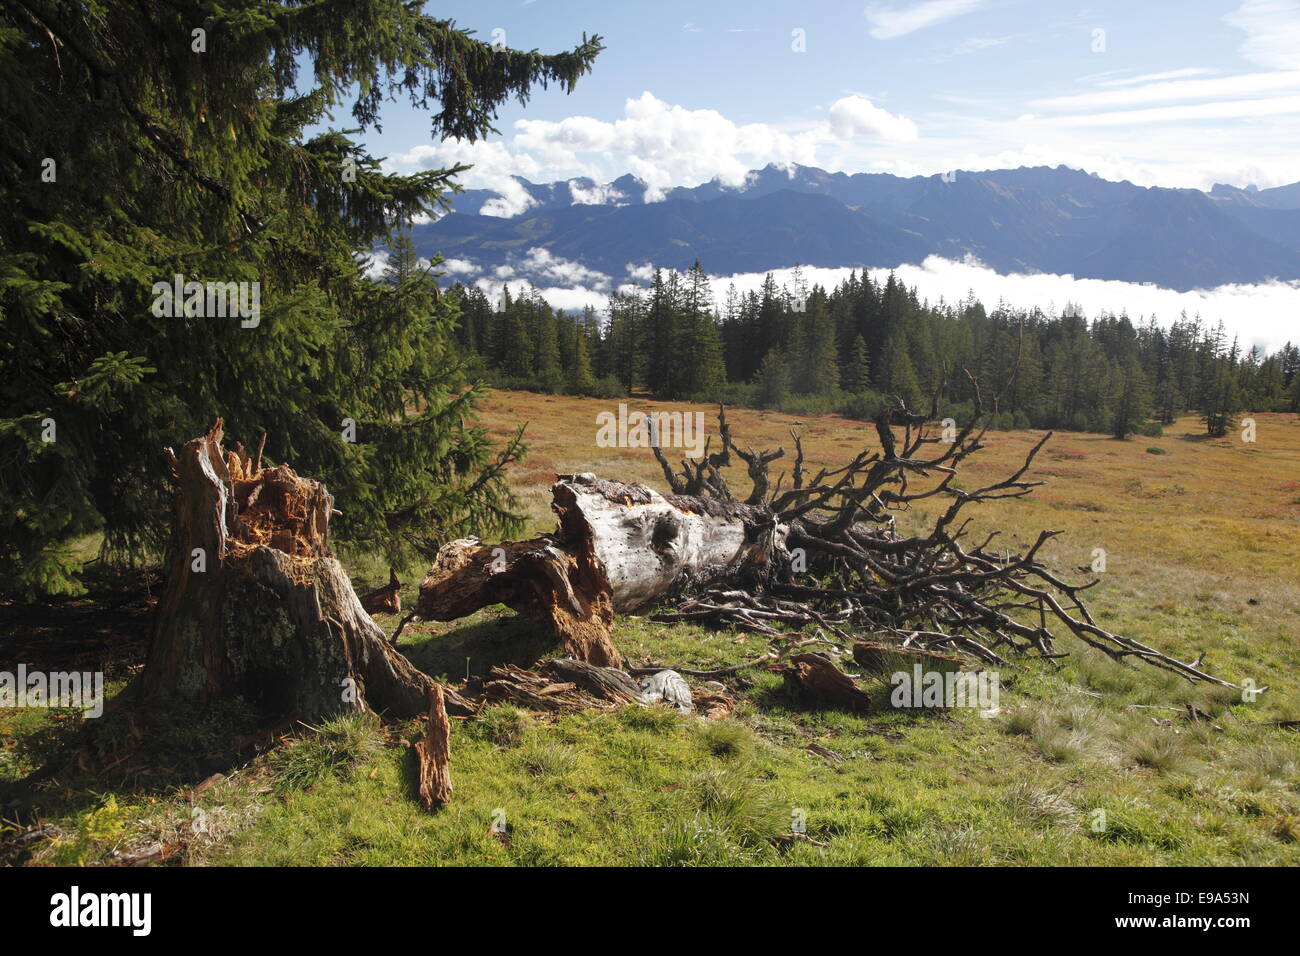 Fallenn old tree, Hoernergroup mountains Stock Photo